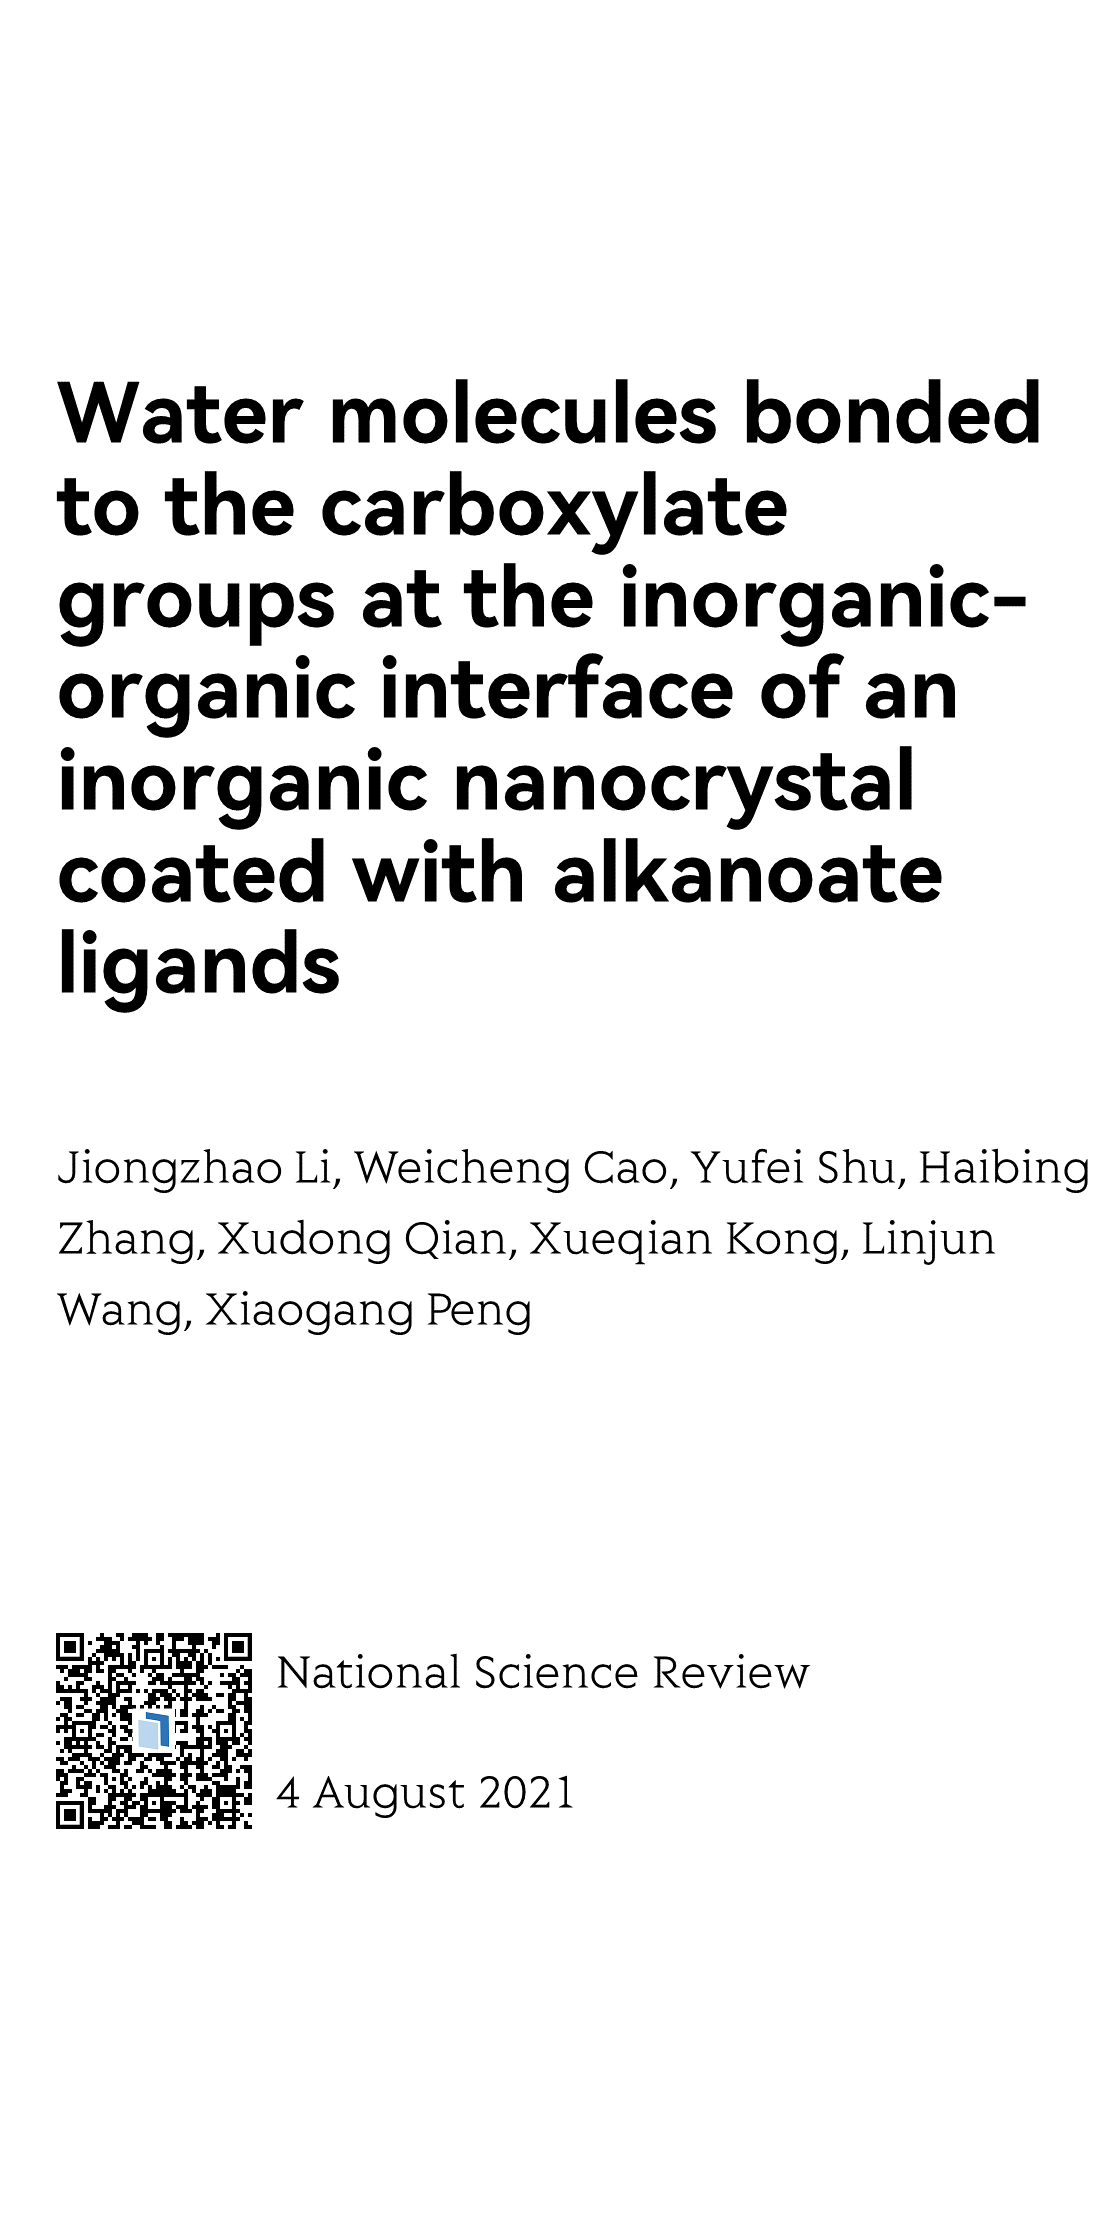 Water molecules bonded to the carboxylate groups at the inorganic-organic interface of an inorganic nanocrystal coated with alkanoate ligands_1